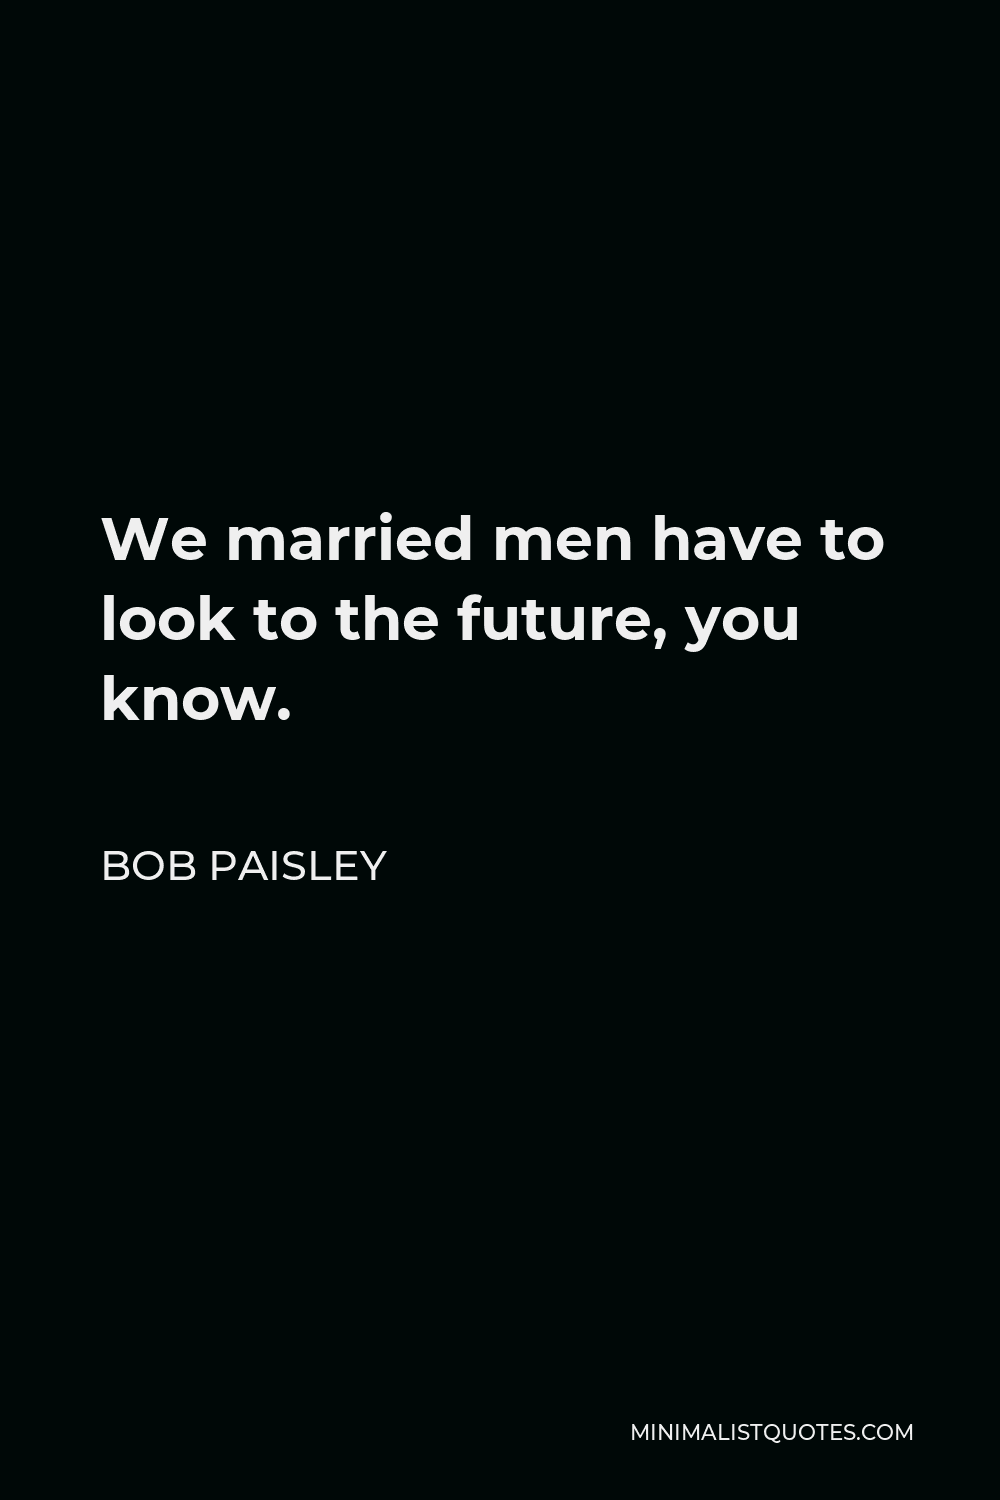 Bob Paisley Quote - We married men have to look to the future, you know.